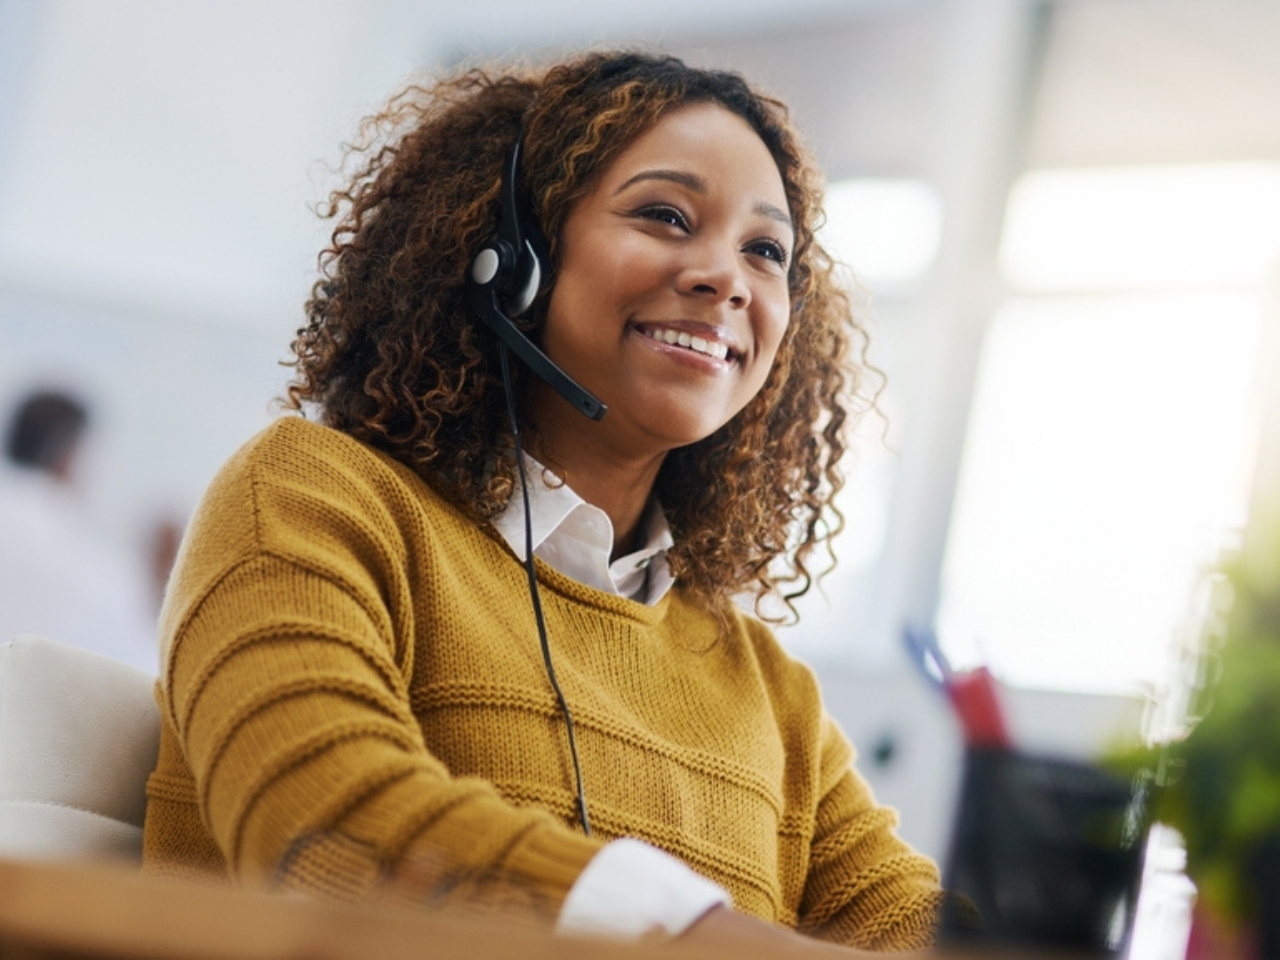 A customer service operator happily using her headset